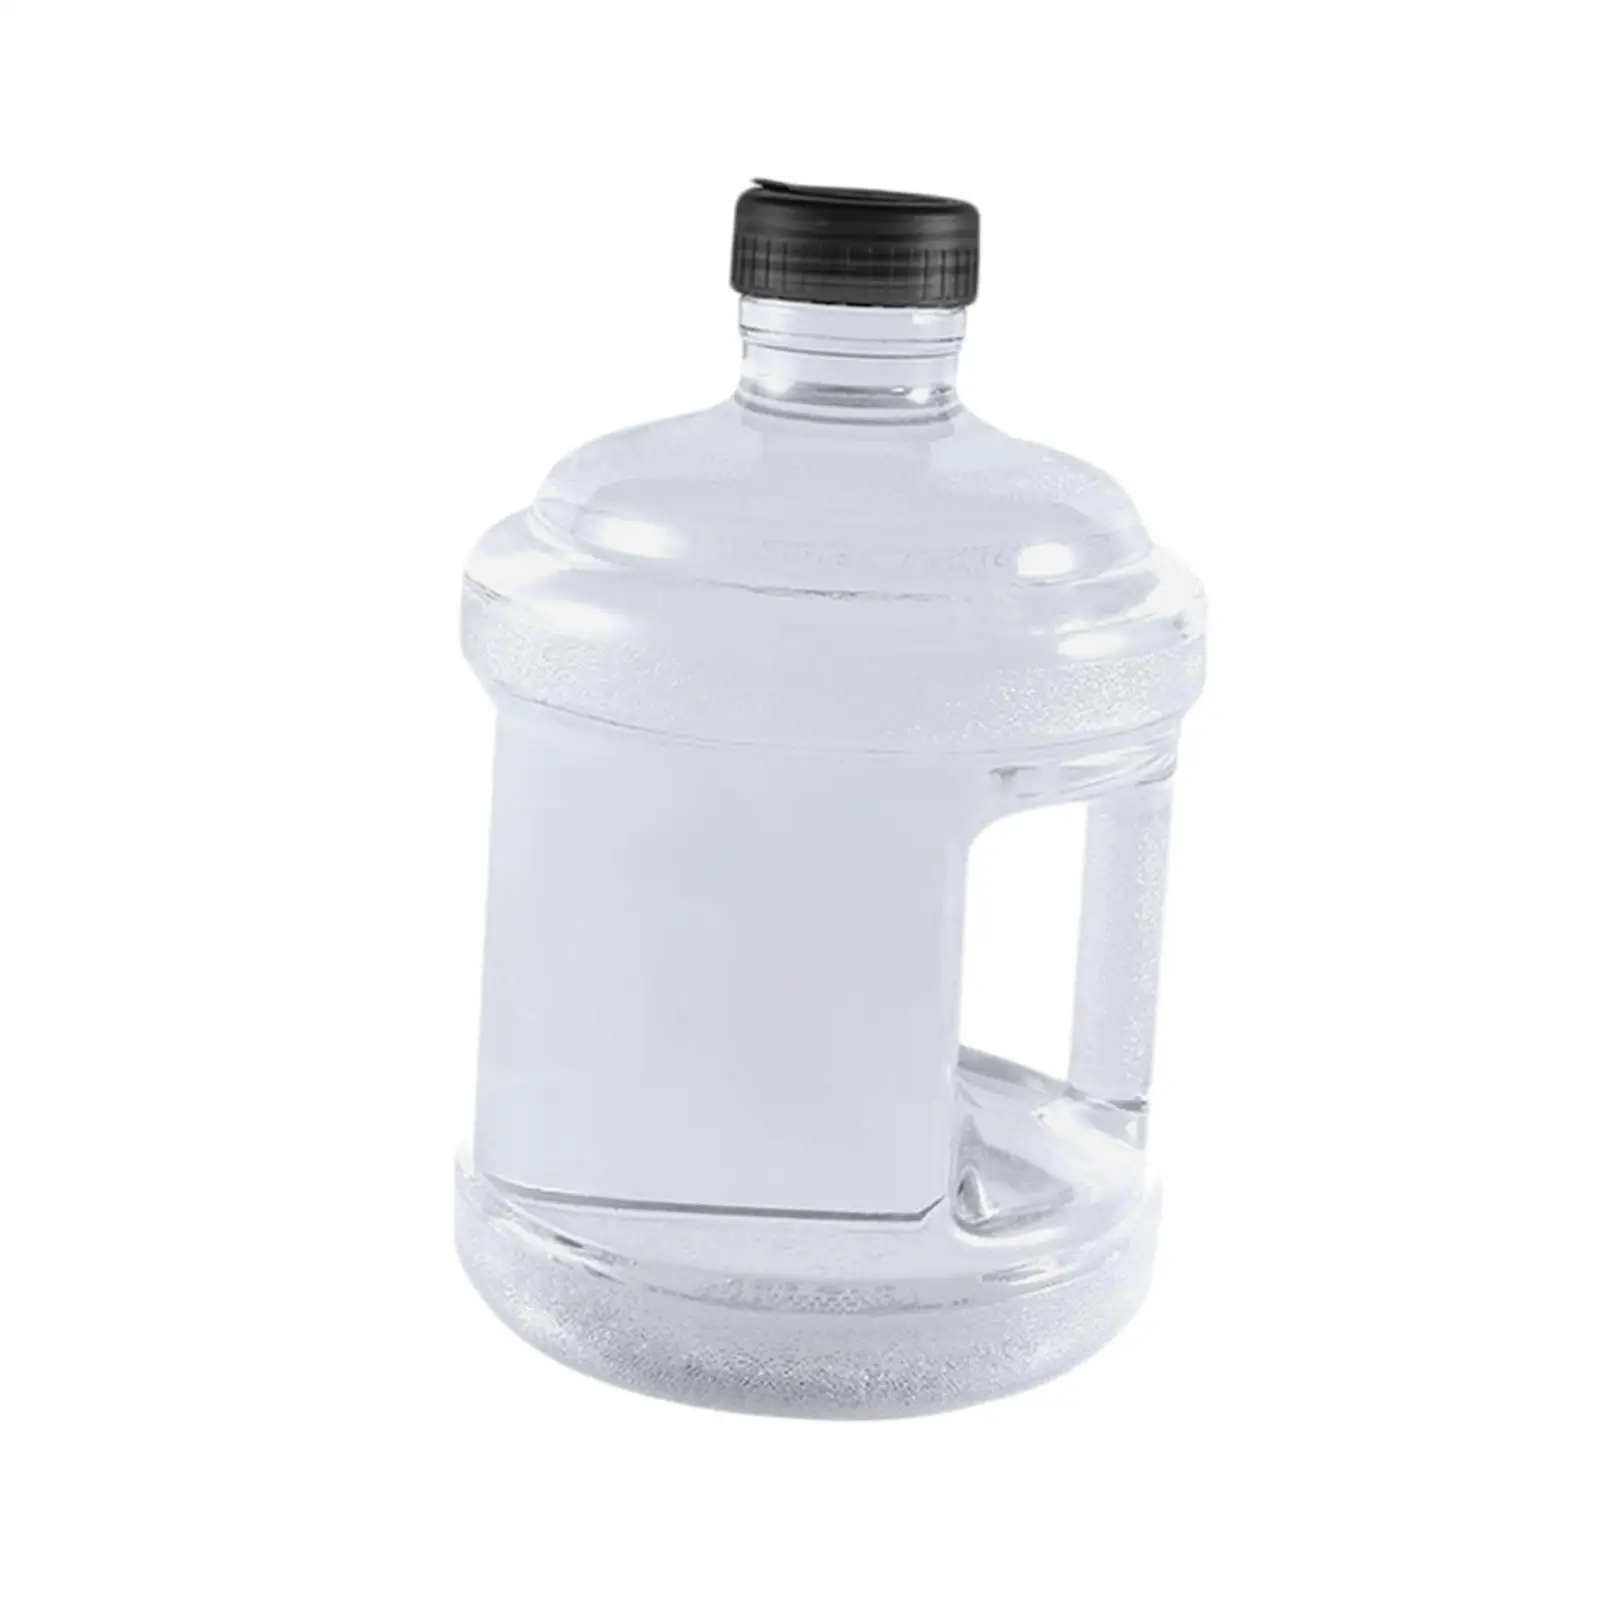 Bucket 3L Pure Water Barrel Food Grade Water Bottle Carrier Water Storage Jugs for Drinking Kitchen Camping Hiking Fittings